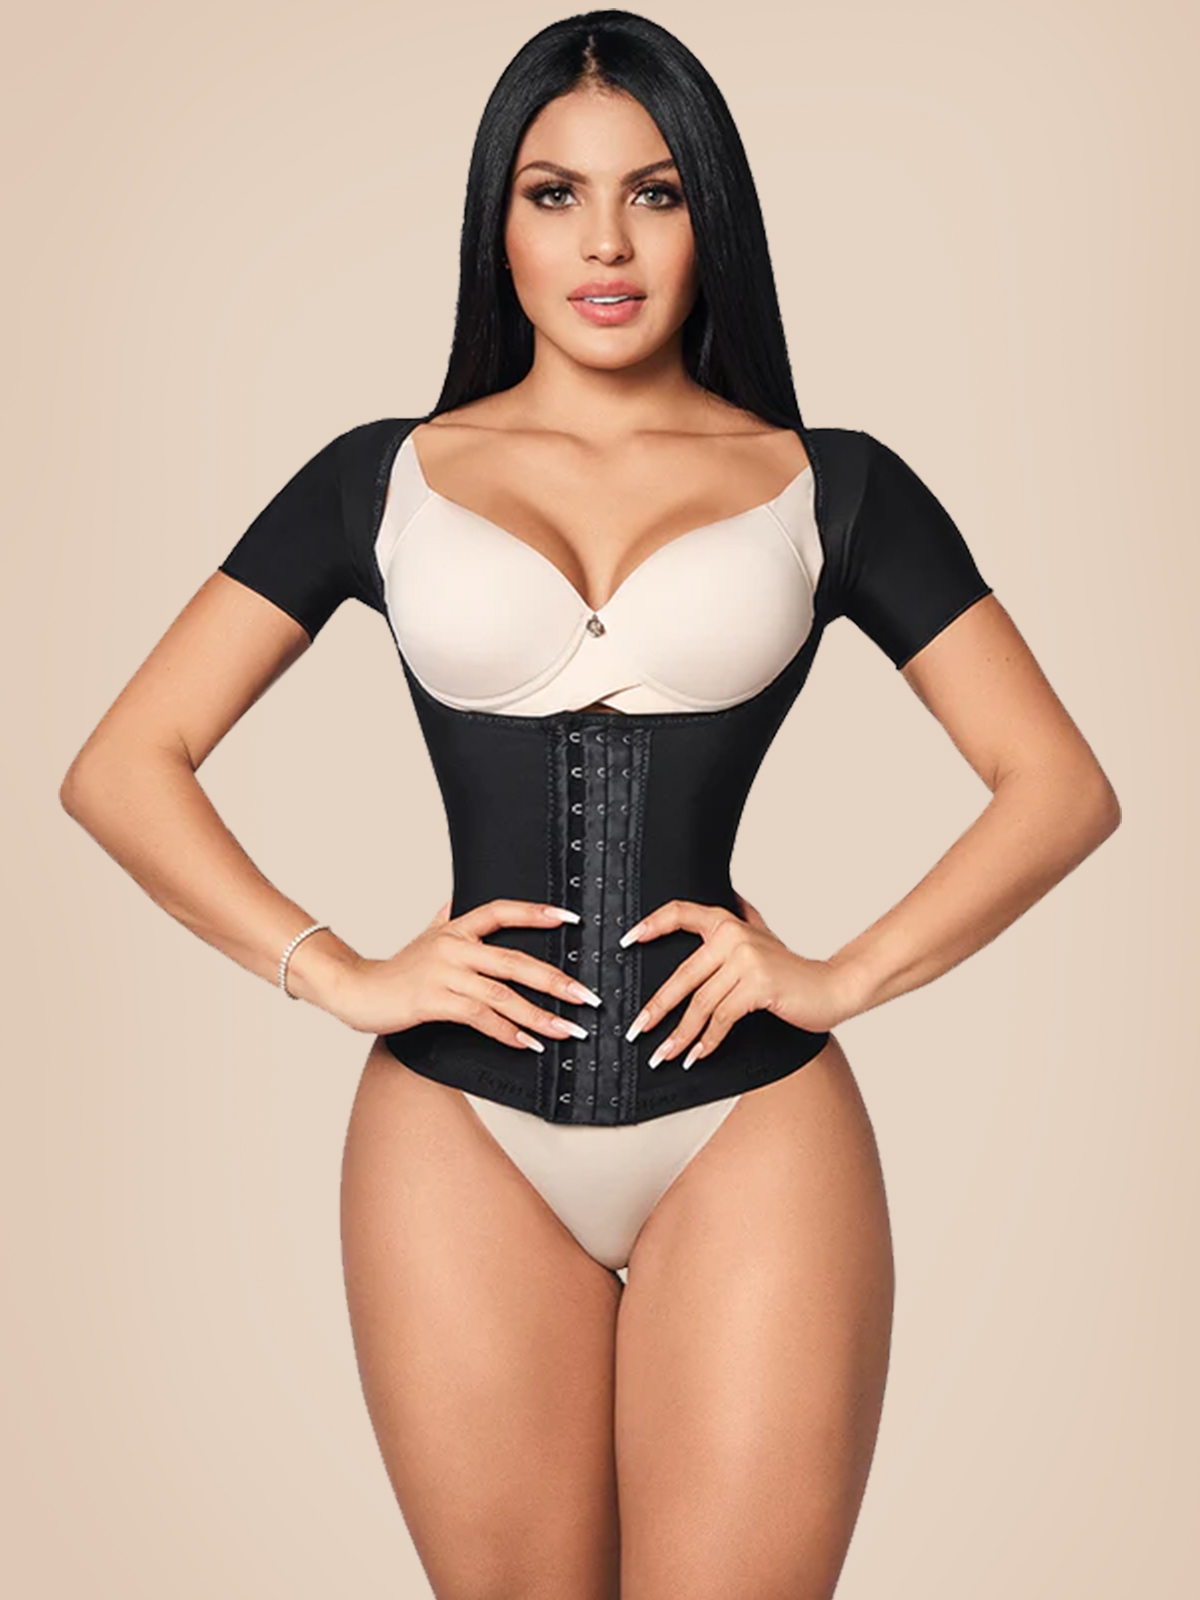 Full Body Shaping Bodysuits for Long Sleeve Compression Garments